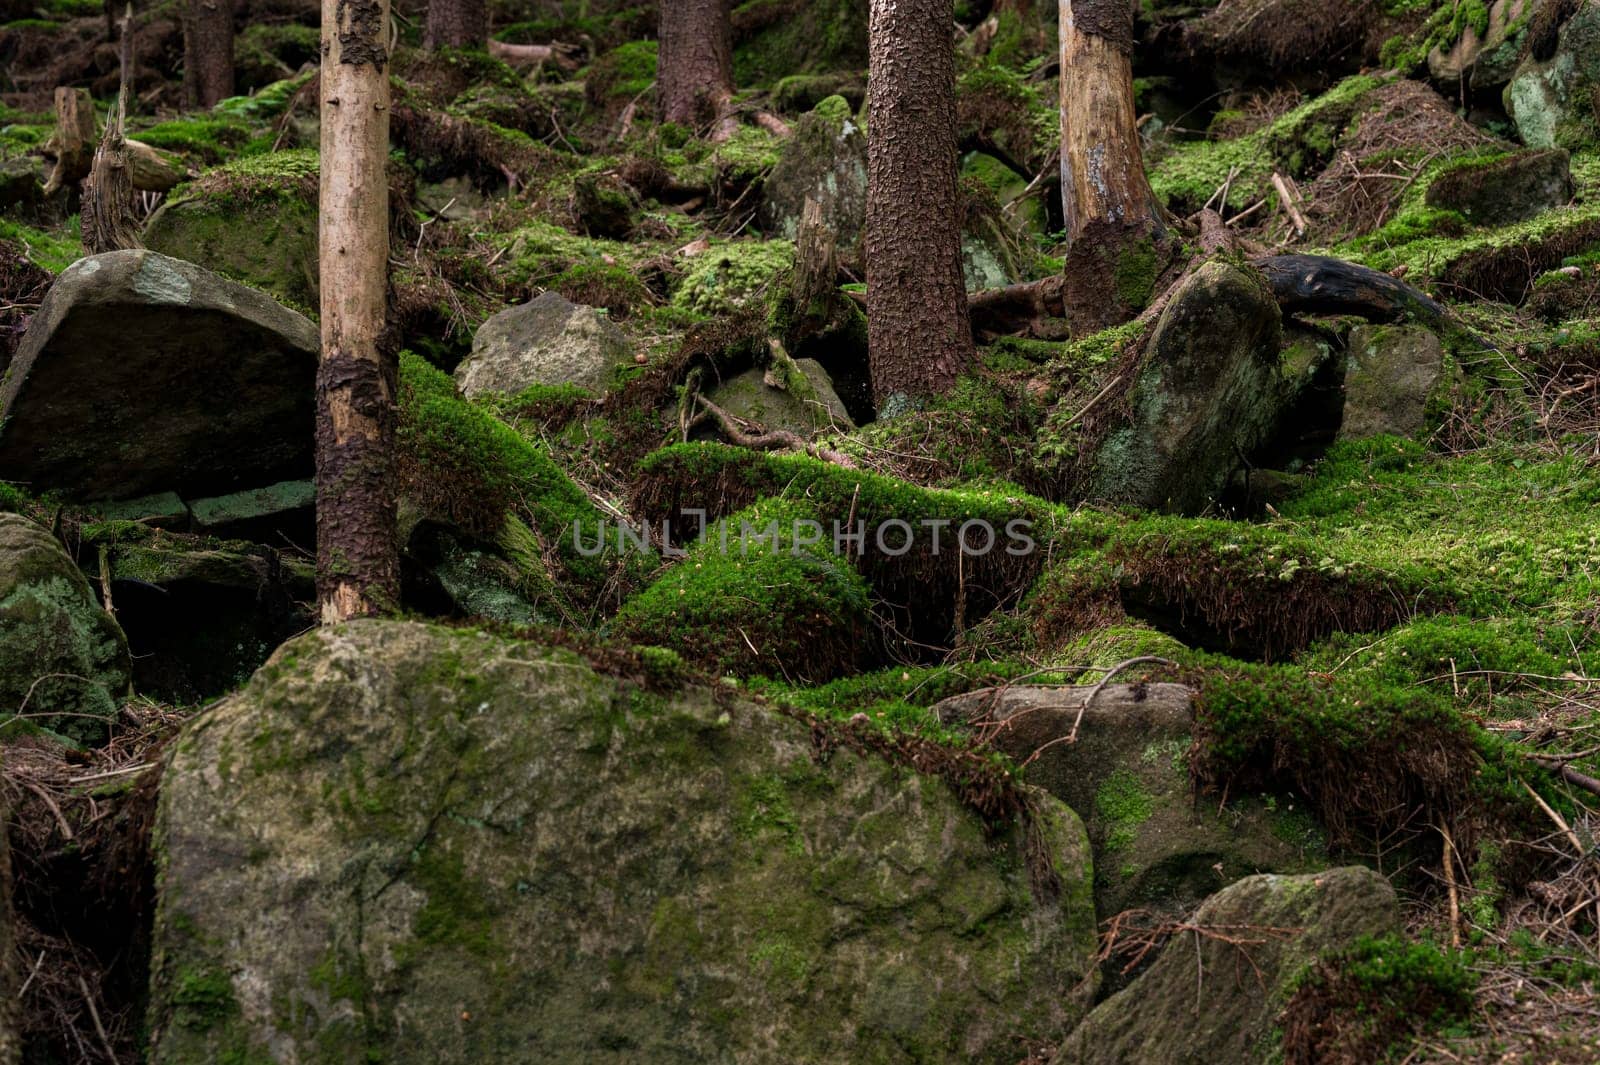 Trees grow between stones that are covered with moss, living nature.